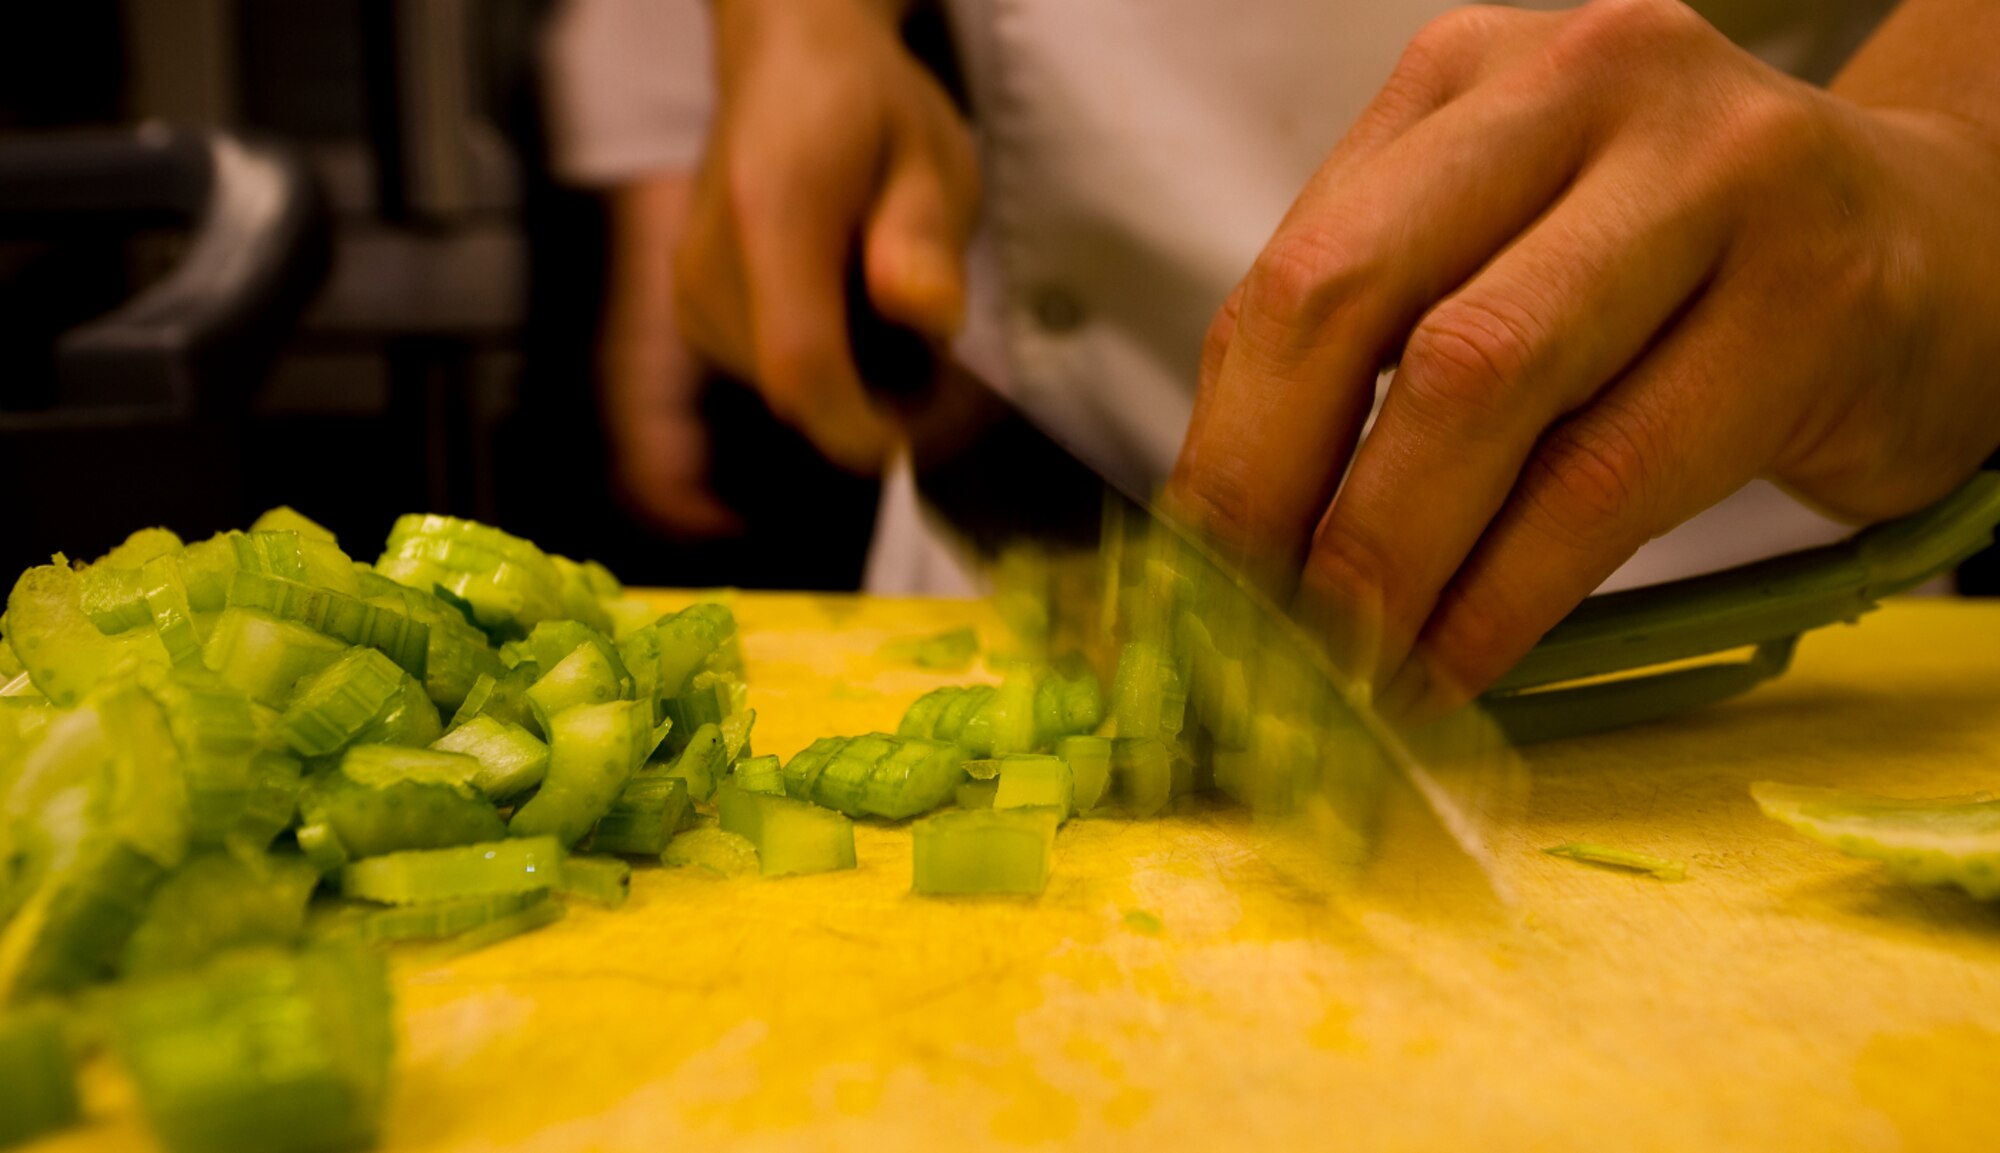 Fast-paced slicing and dicing with razor-sharp knives can lead to chopped fingers. Chef Nuval says avoid losing focus or ?showing off? to avoid a painful mishap. (photo by Tech. Sgt. Matthew Hannen)